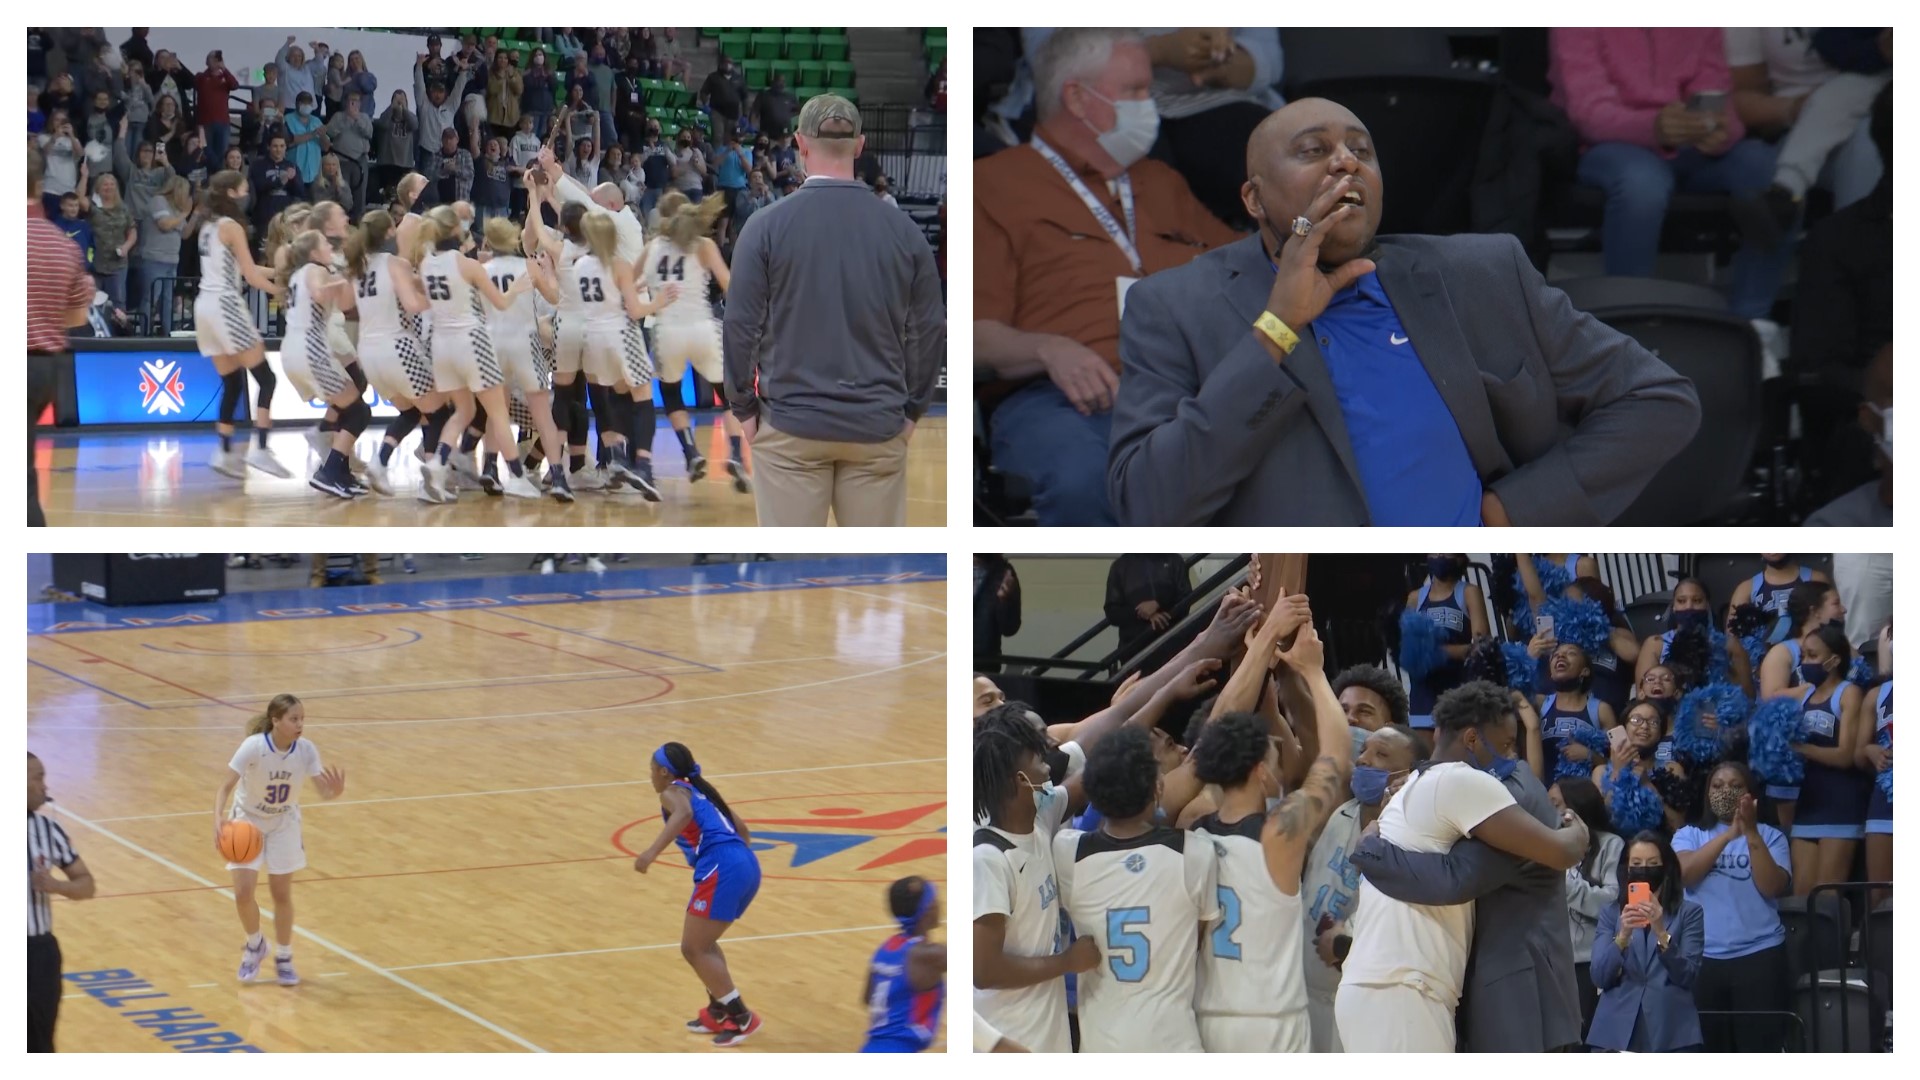 The Rogers & Mae Jemison girls along with the Lee boys all tried to win a state basketball championship and bring back a blue map to north Alabama.